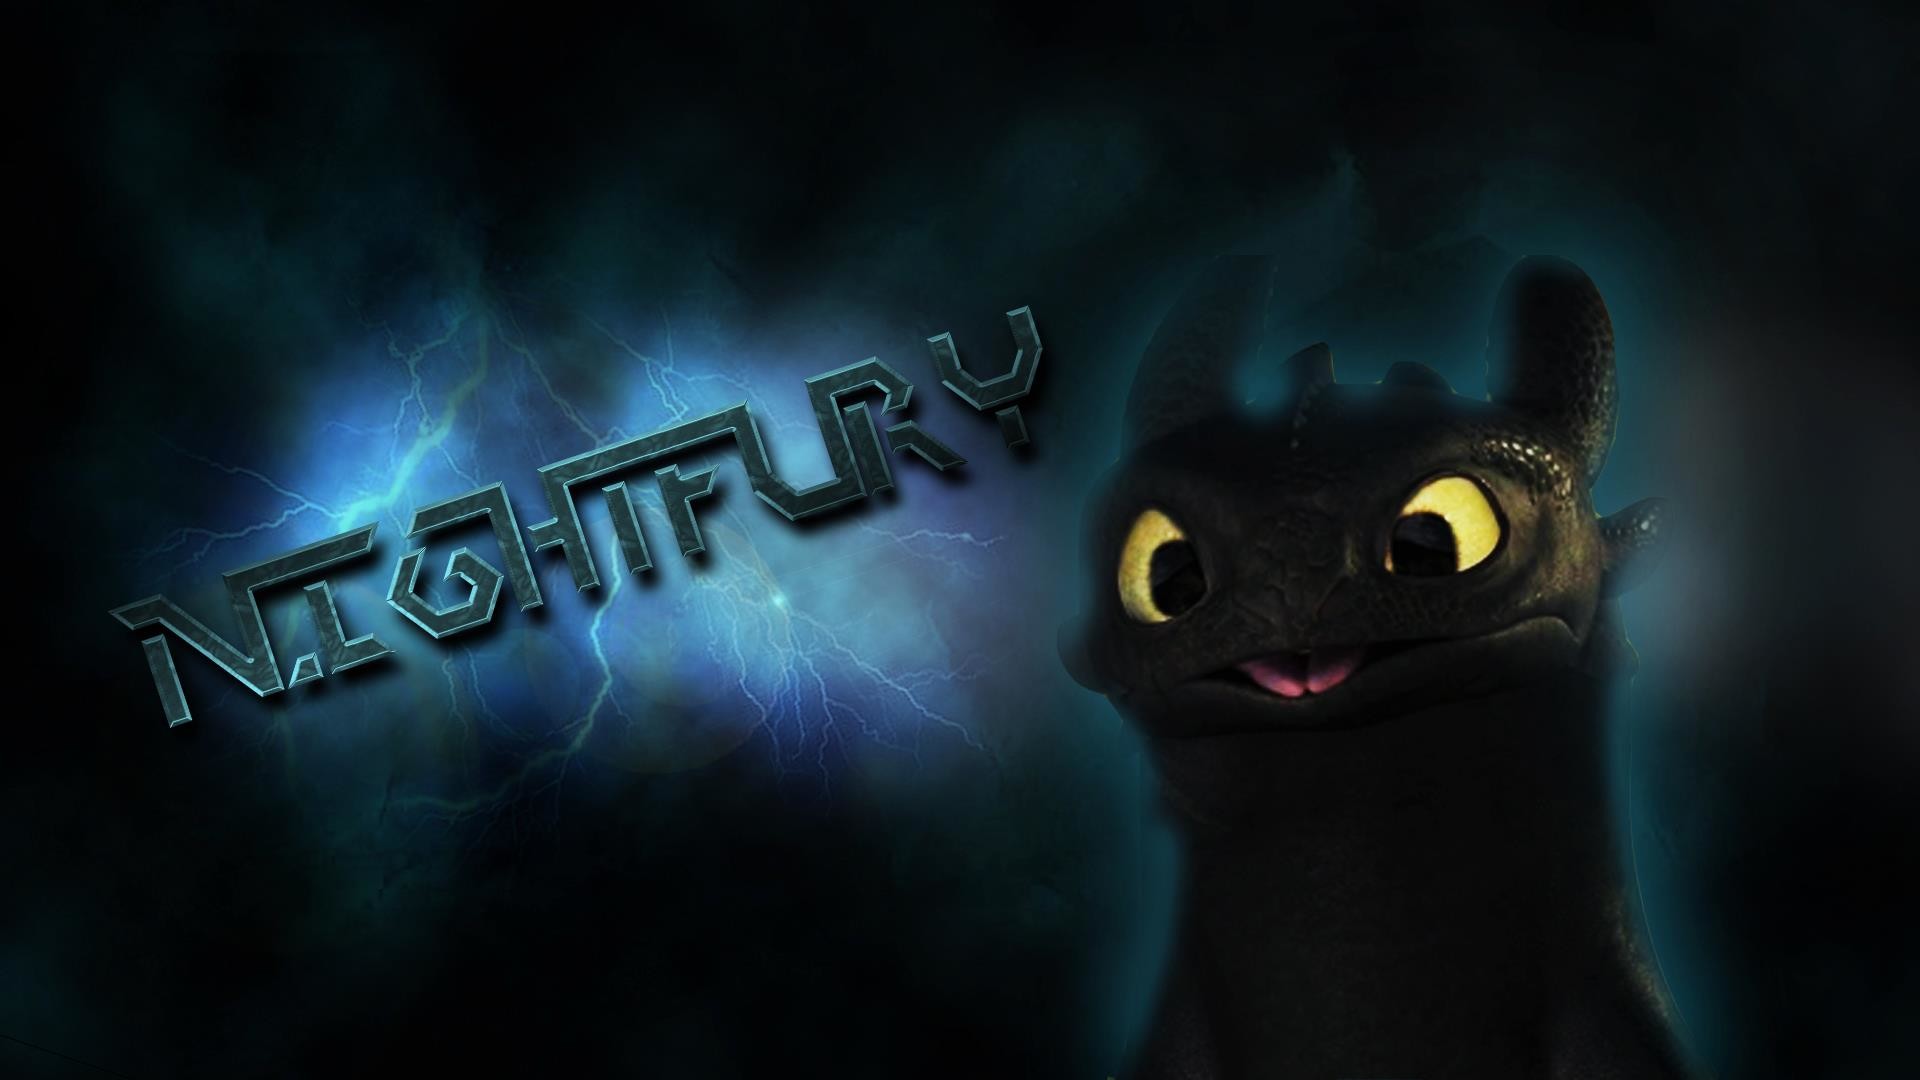 1920x1080 Search Results for “night fury wallpaper hd” – Adorable Wallpapers